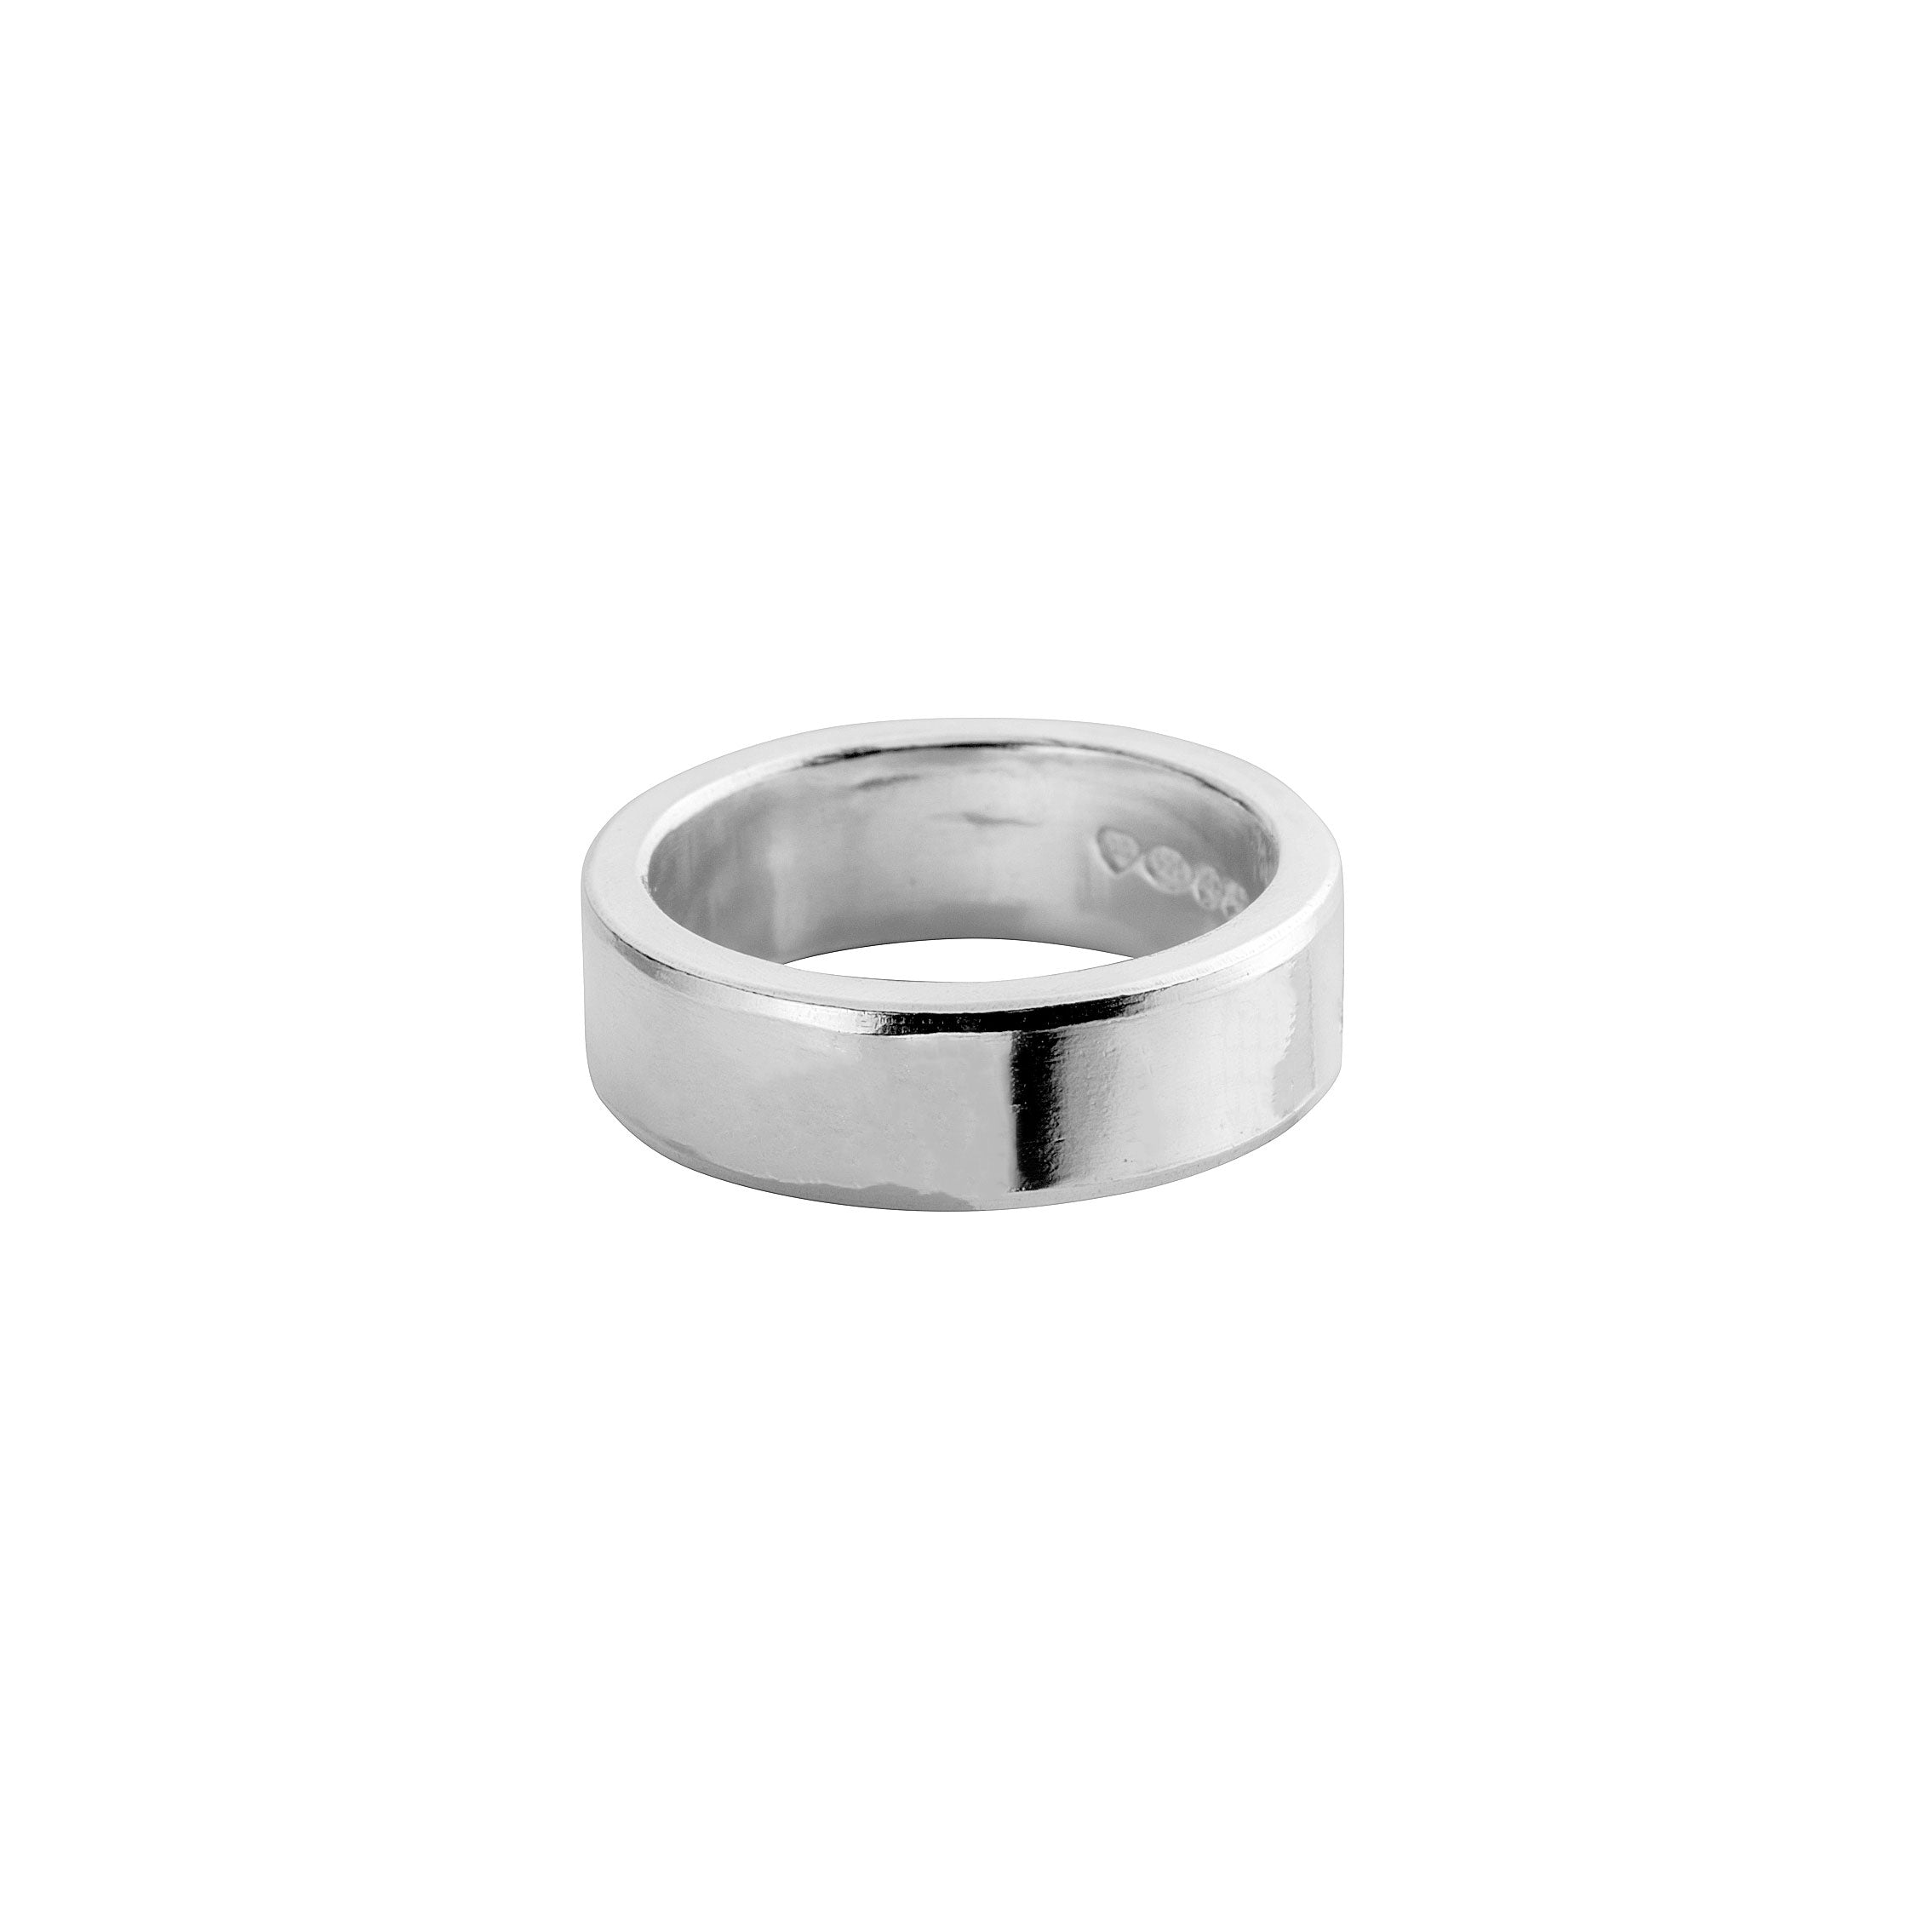 Silver Maxi Signature Ring with Handwriting